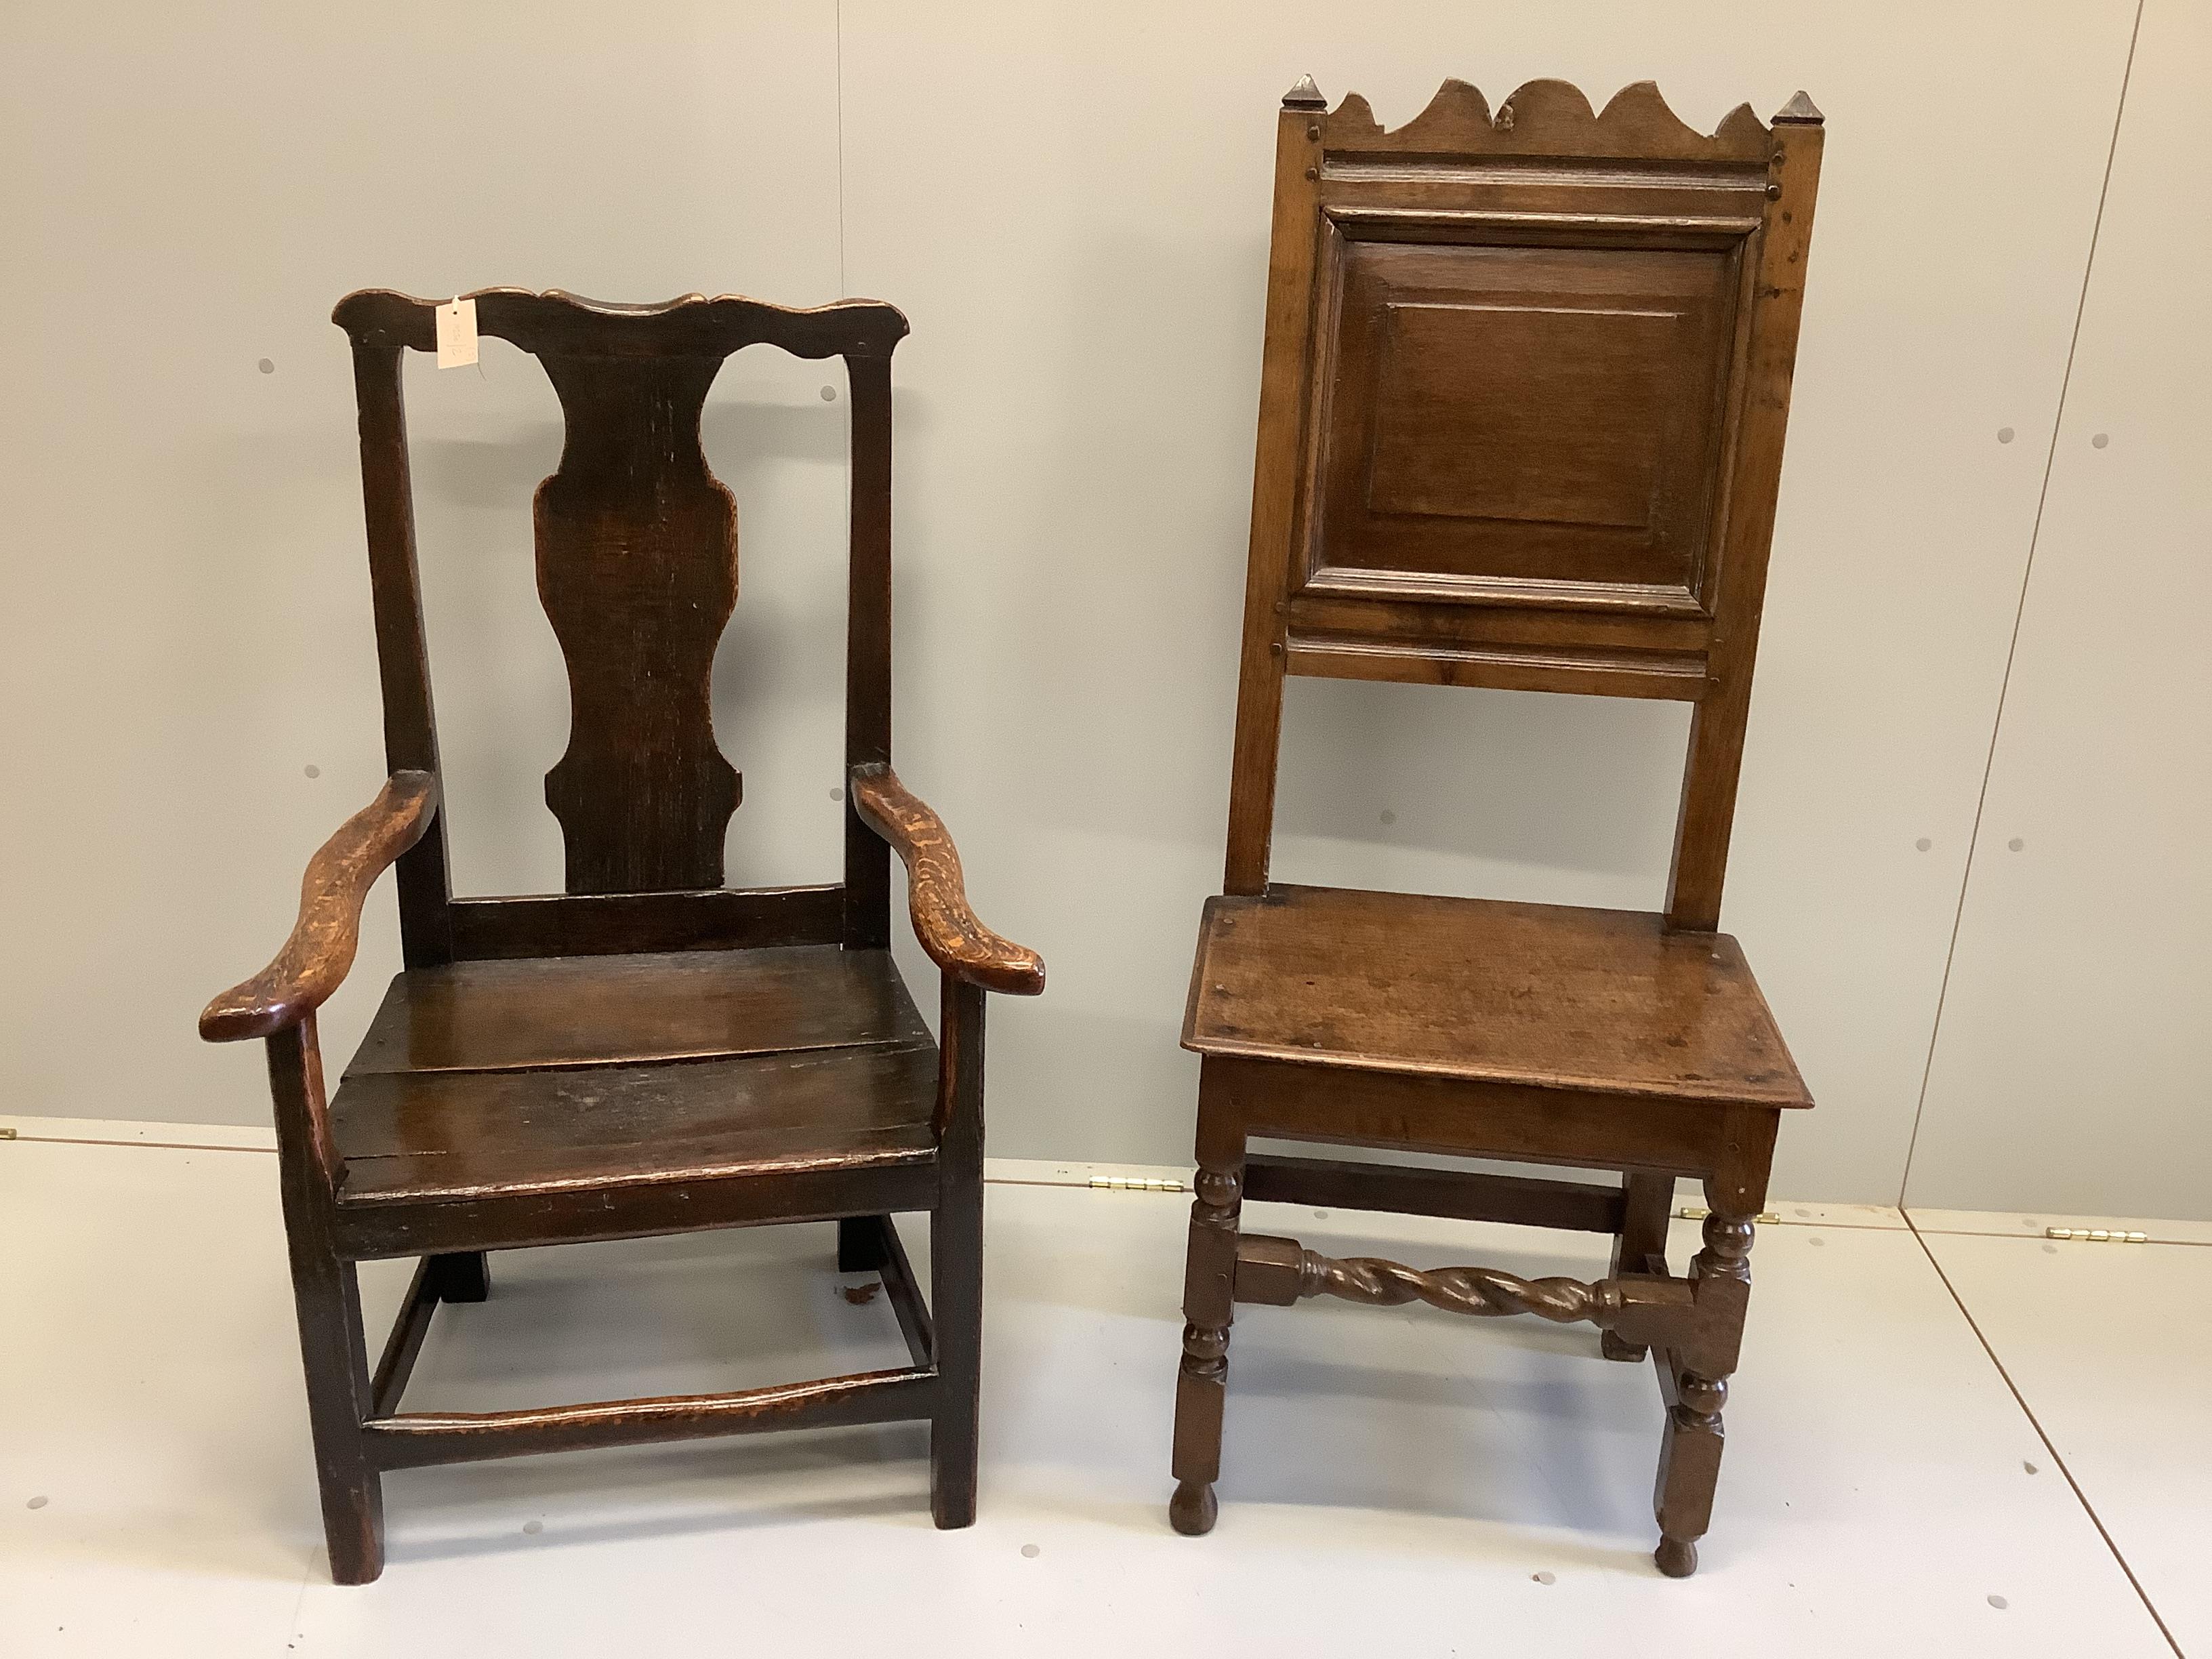 An early 18th century Provincial oak elbow chair, width 61cm, depth 50cm, height 100cm, together with a panelled high back dining chair